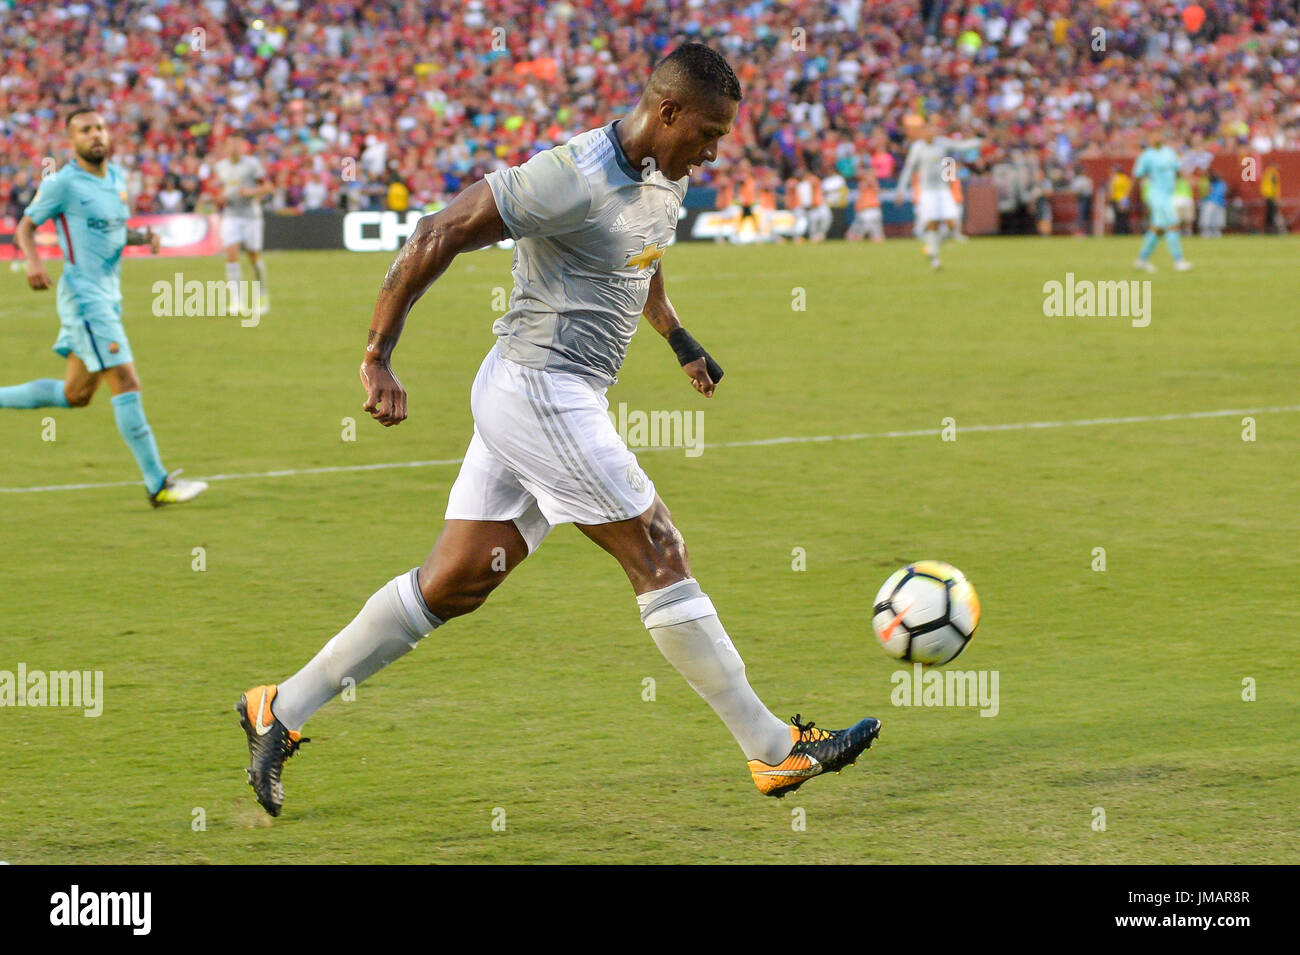 Landover, Maryland, USA. 26th July, 2017. Manchester United's ANTONIO VALENCIA (25) kicks the ball towards the goal during the first half of the game held at FEDEXFIELD in Landover, Maryland. Credit: Amy Sanderson/ZUMA Wire/Alamy Live News Stock Photo